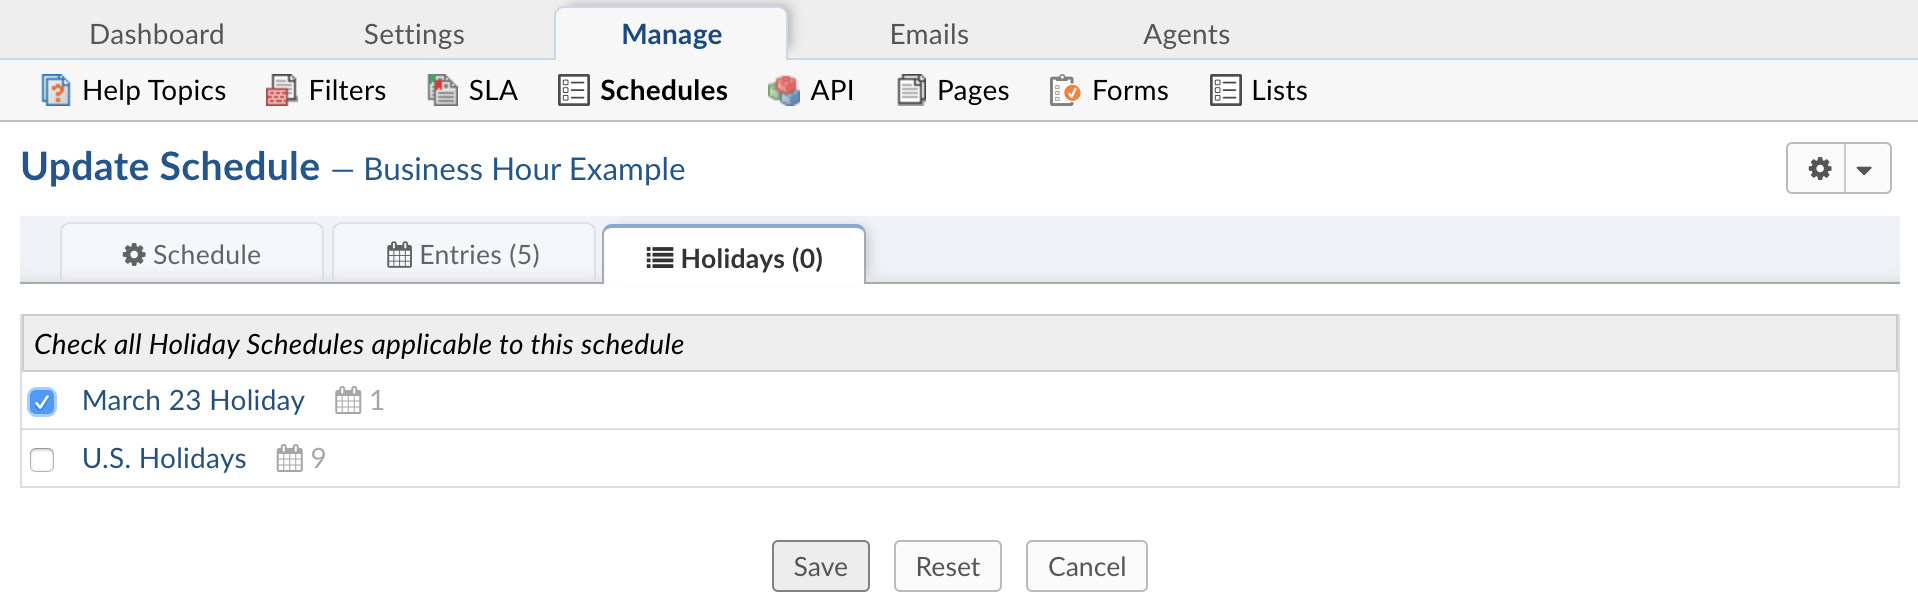 Add Holiday to Schedule 2